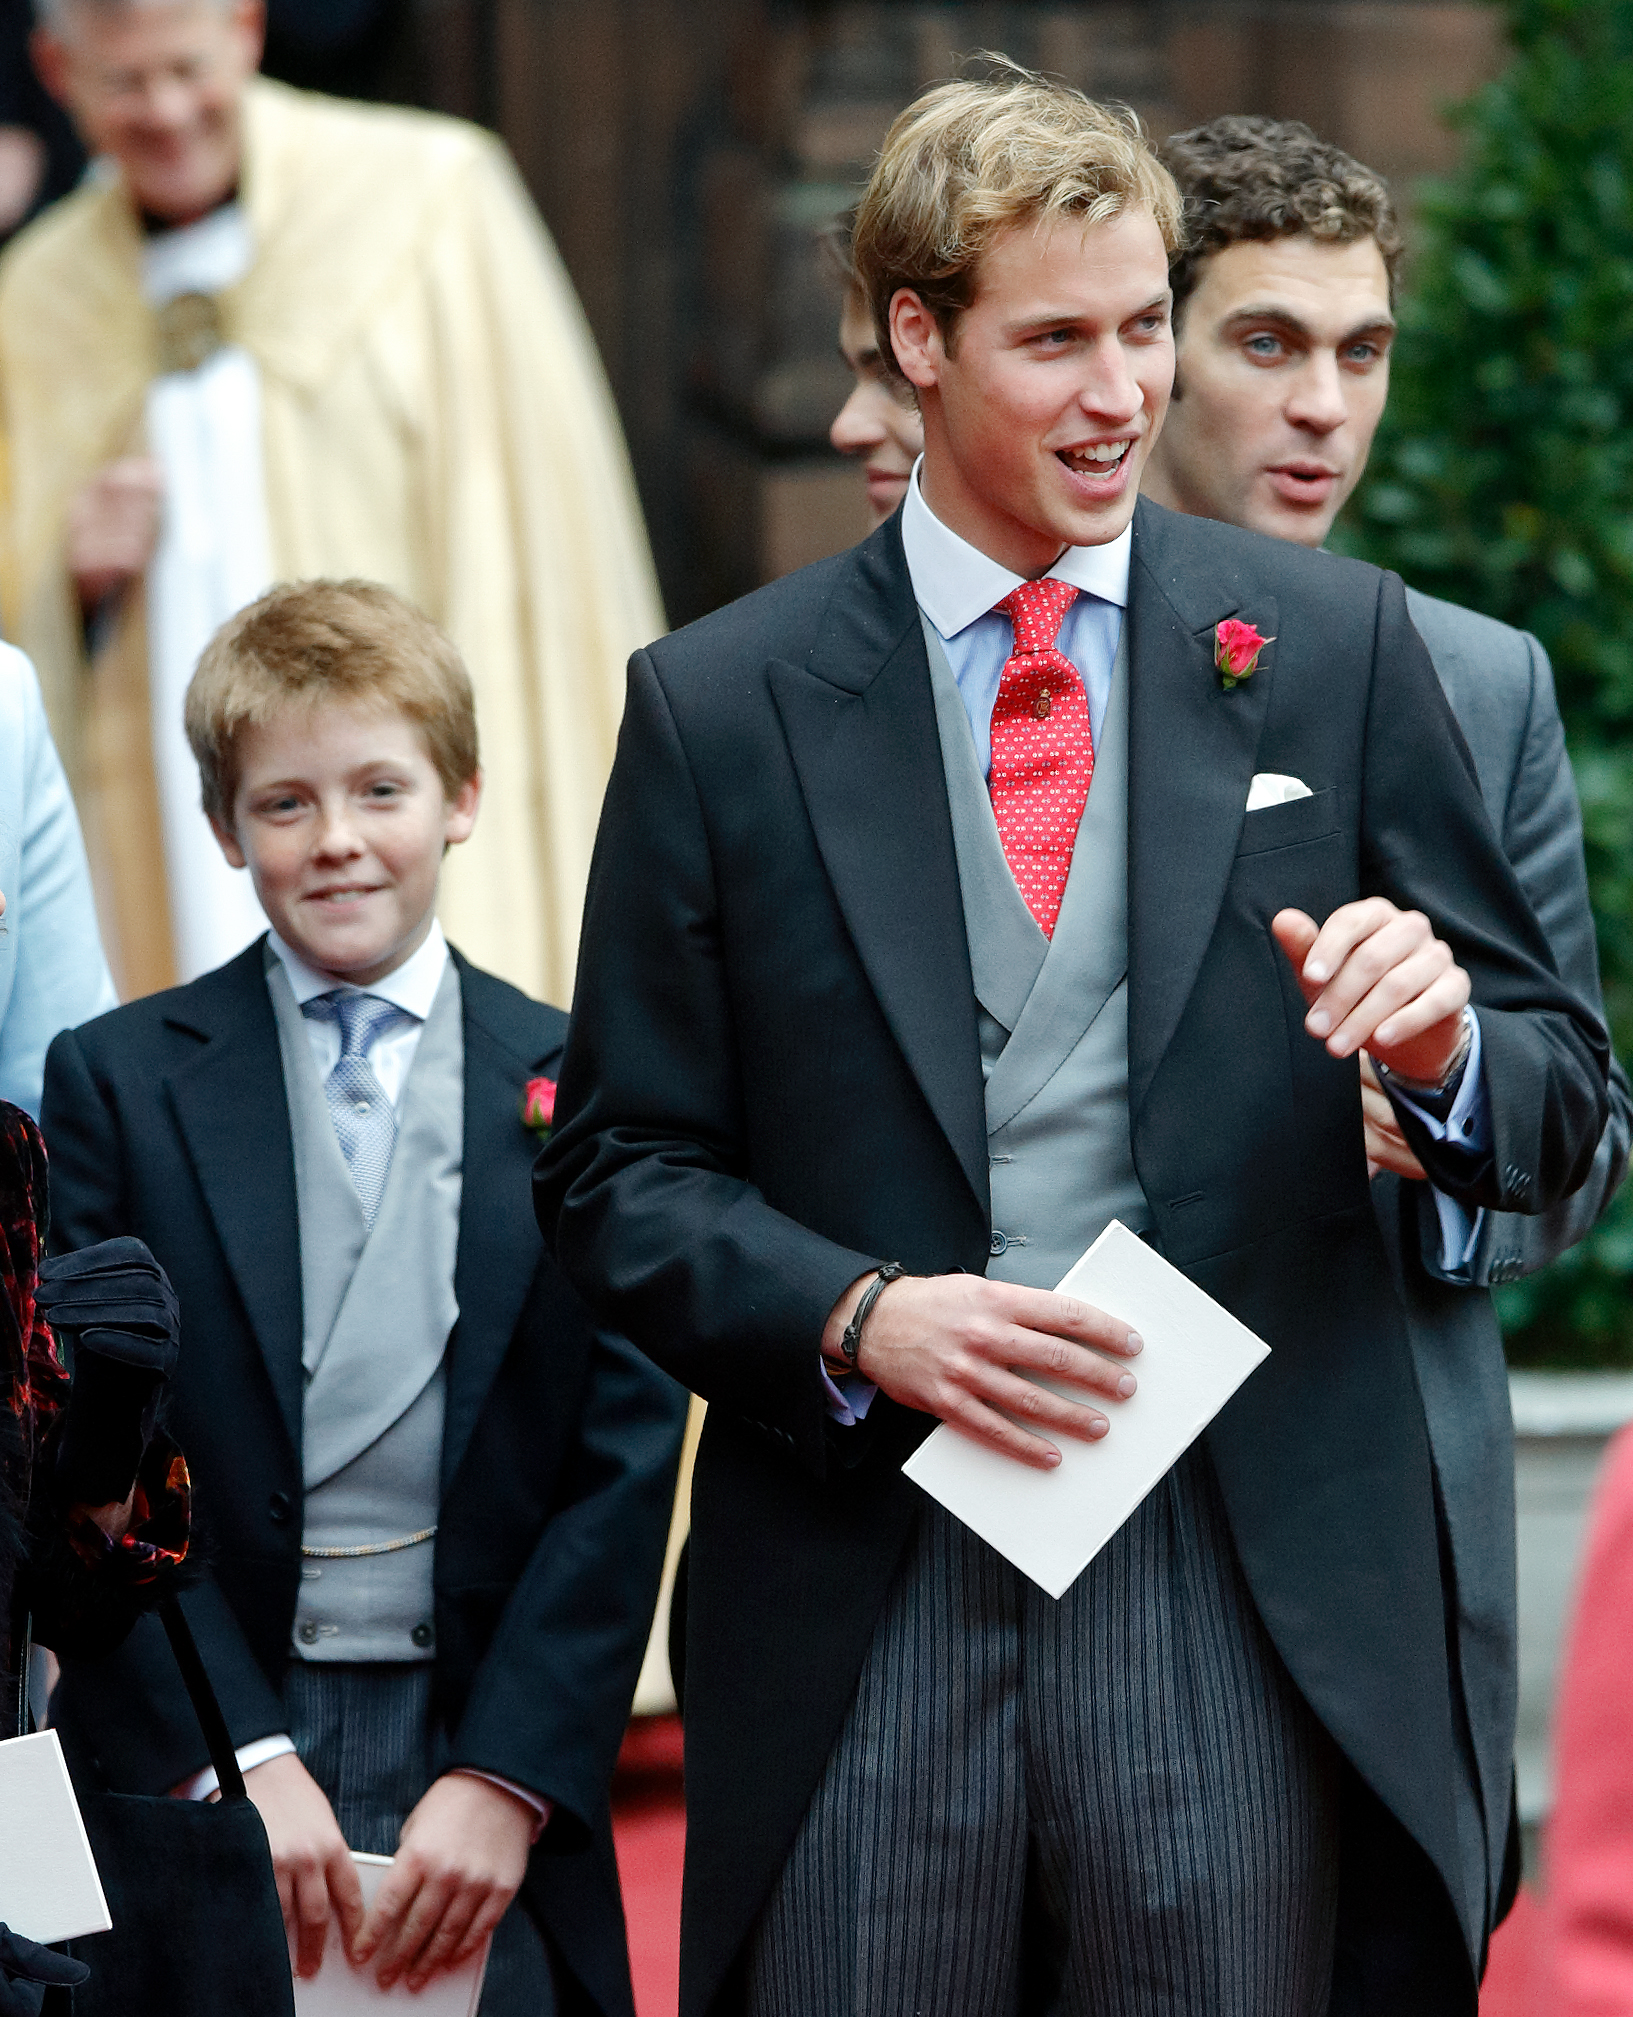 Hugh Grosvenor, Earl Grosvenor, and Prince William at the wedding of Edward van Cutsem and Lady Tamara Grosvenor on November 6, 2004, in Chester, England | Source: Getty Images